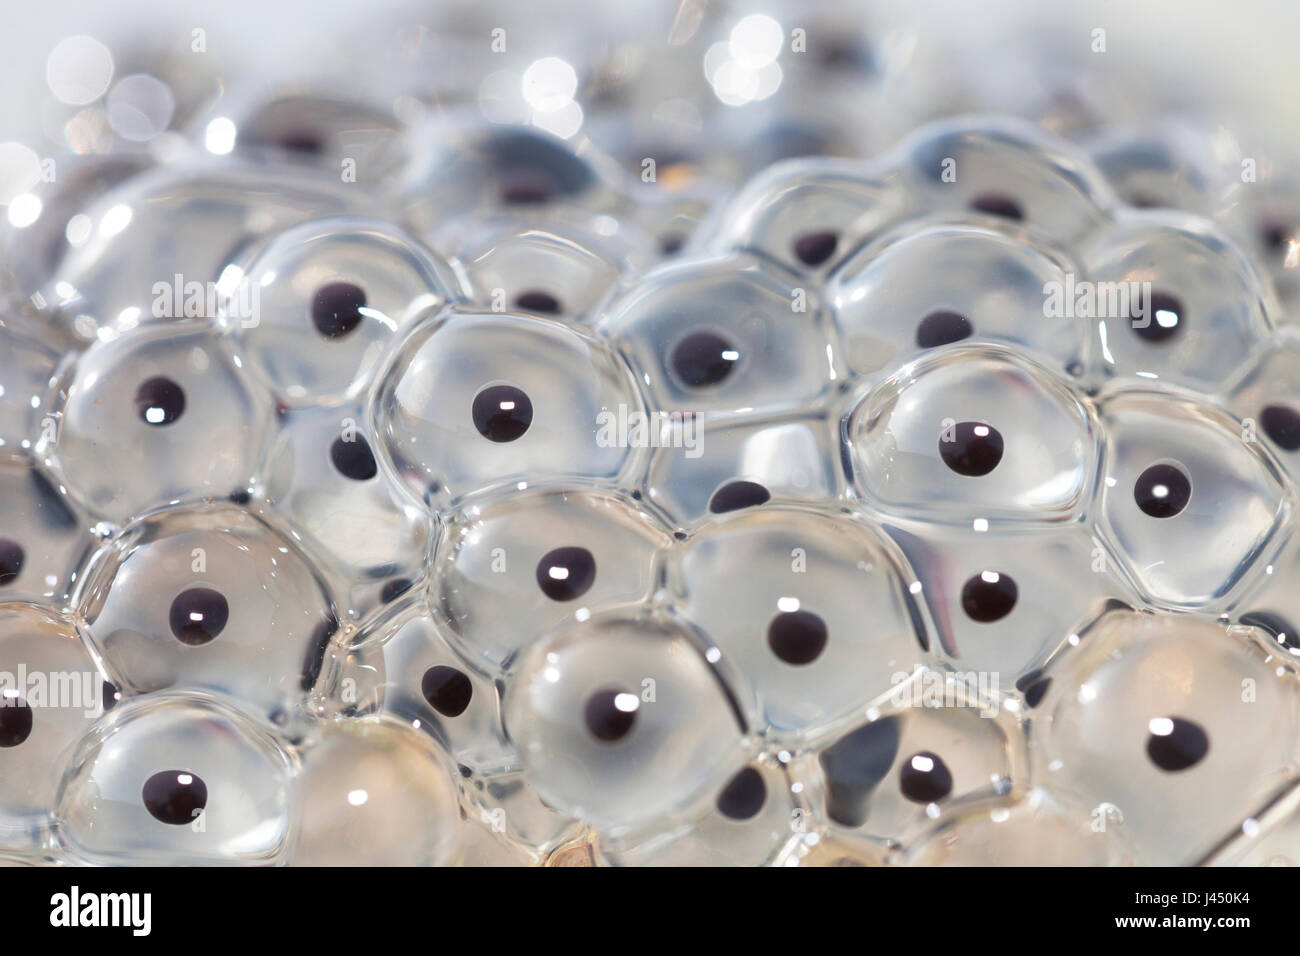 Frog spawn from common frog Stock Photo